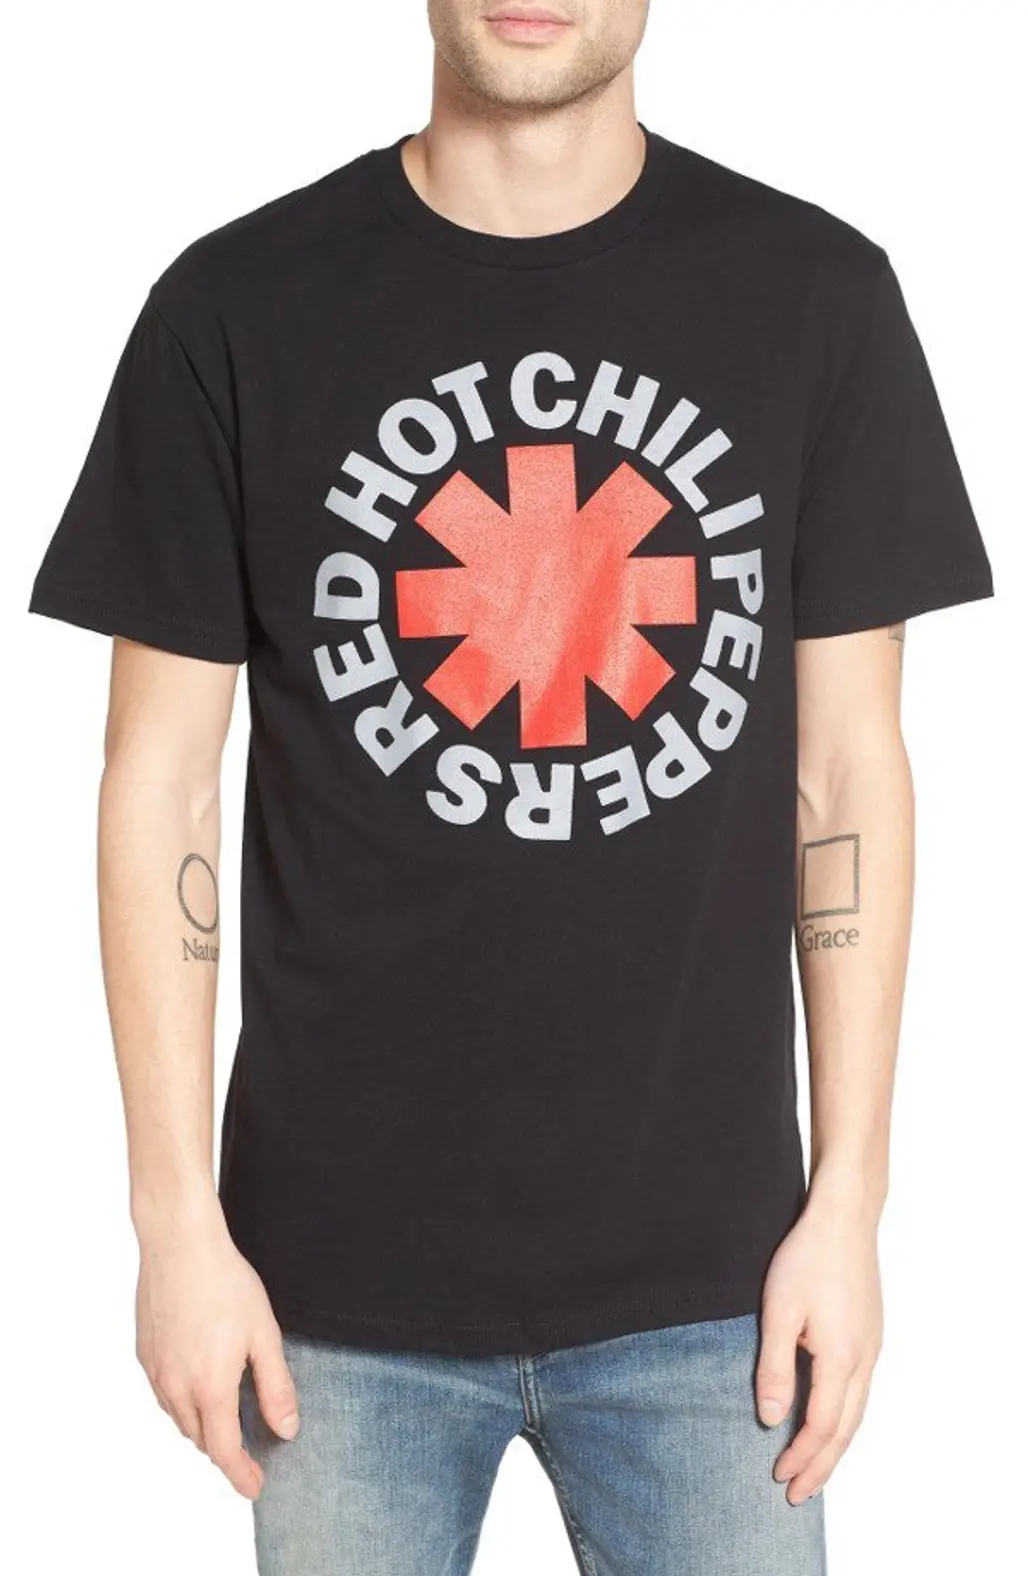 Red Hot Chili Peppers,t shirt,clothing,sleeve,font,